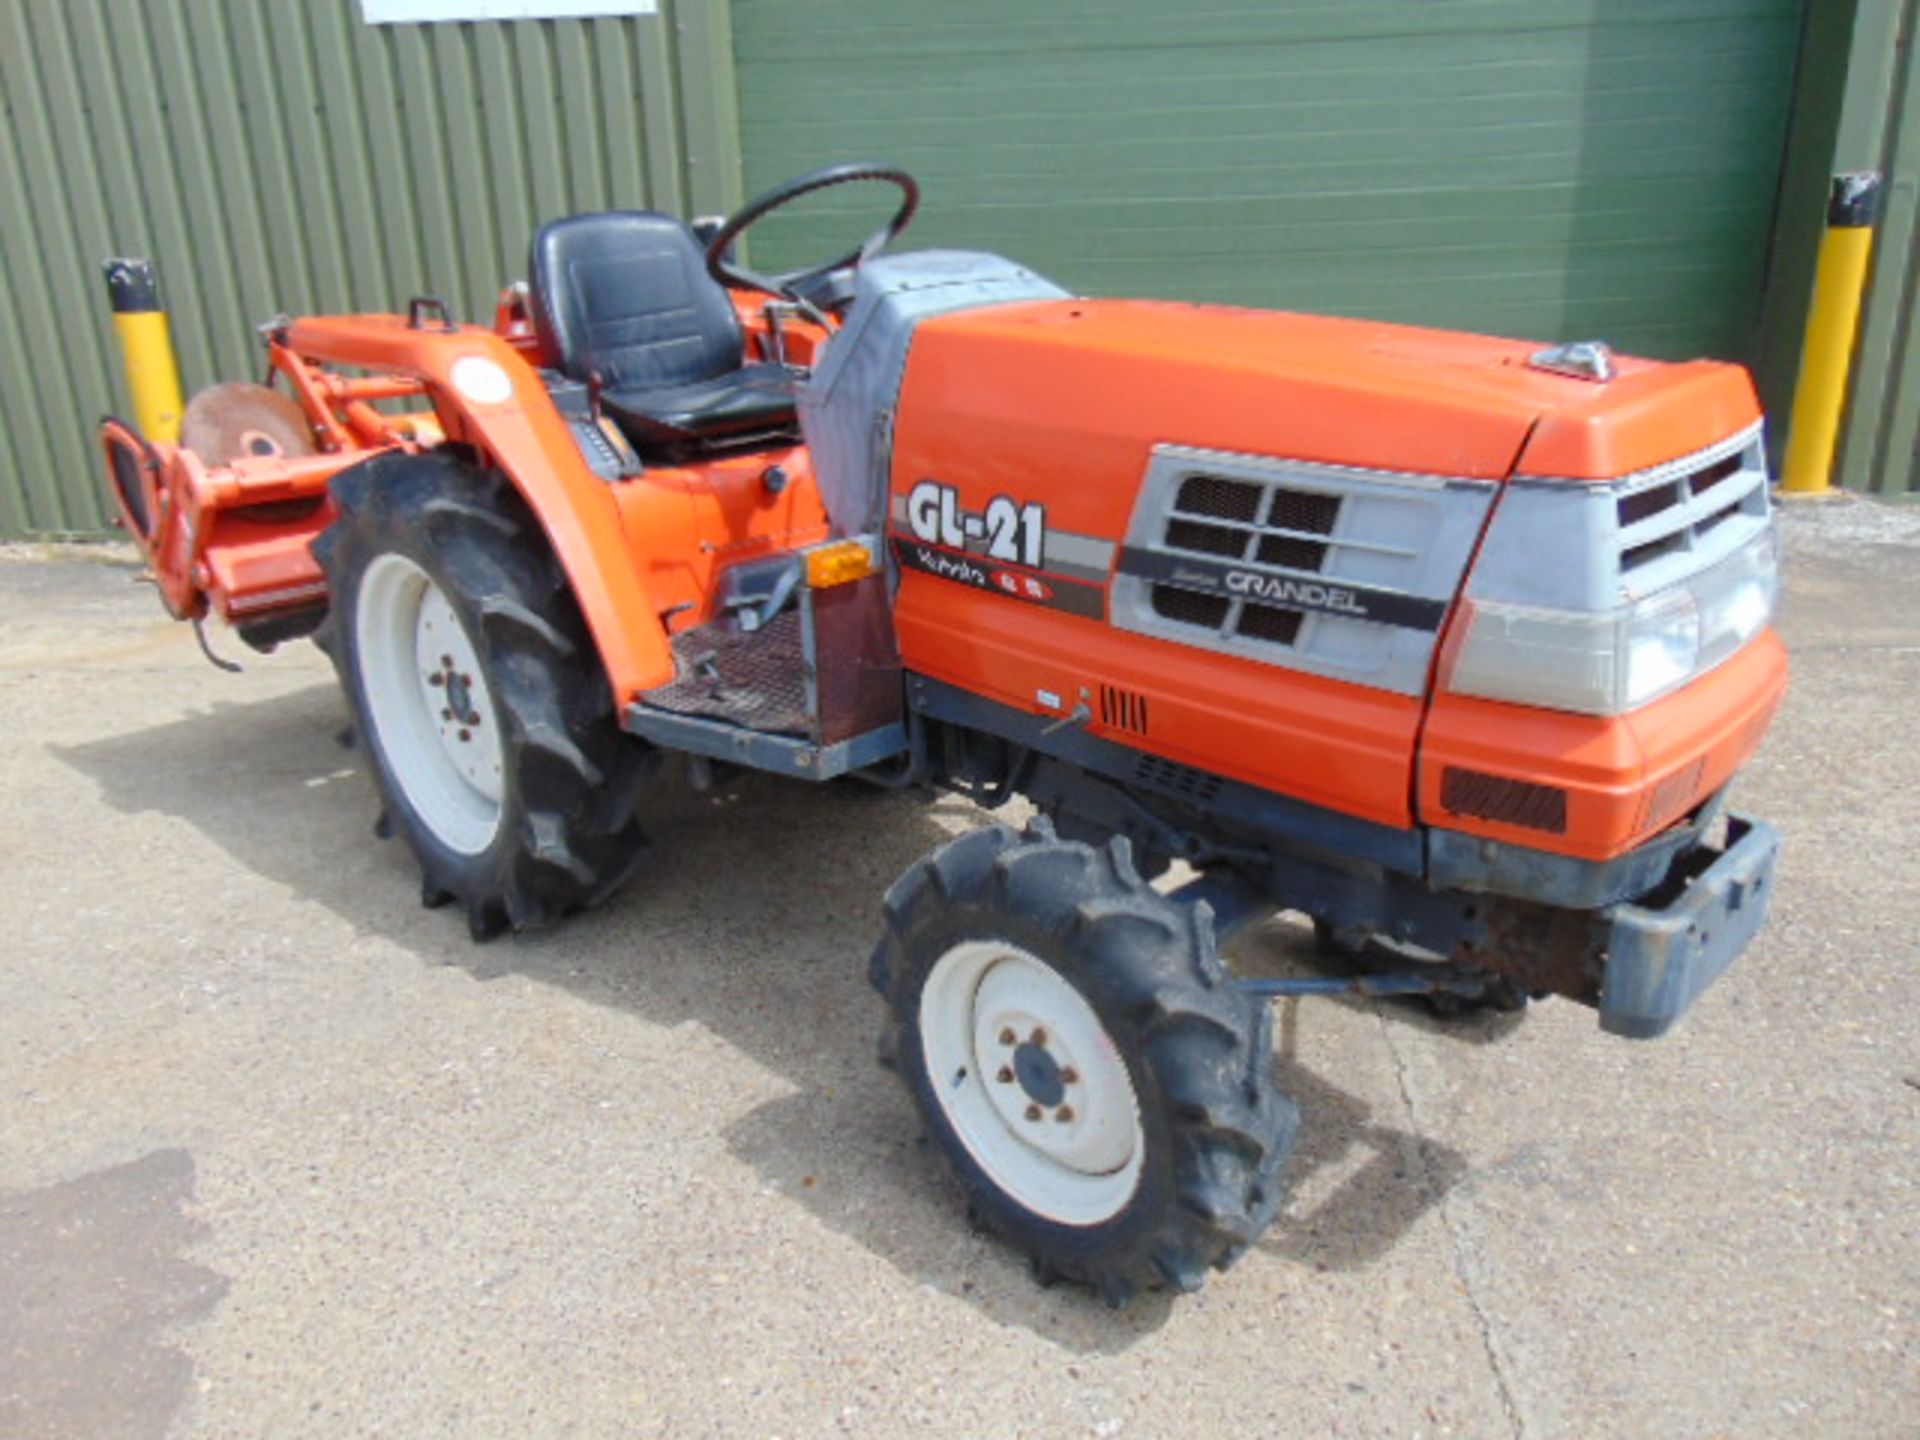 Kubota GL21 Compact Tractor c/w RL14 Rotavator ONLY 670 HOURS! - Image 2 of 29